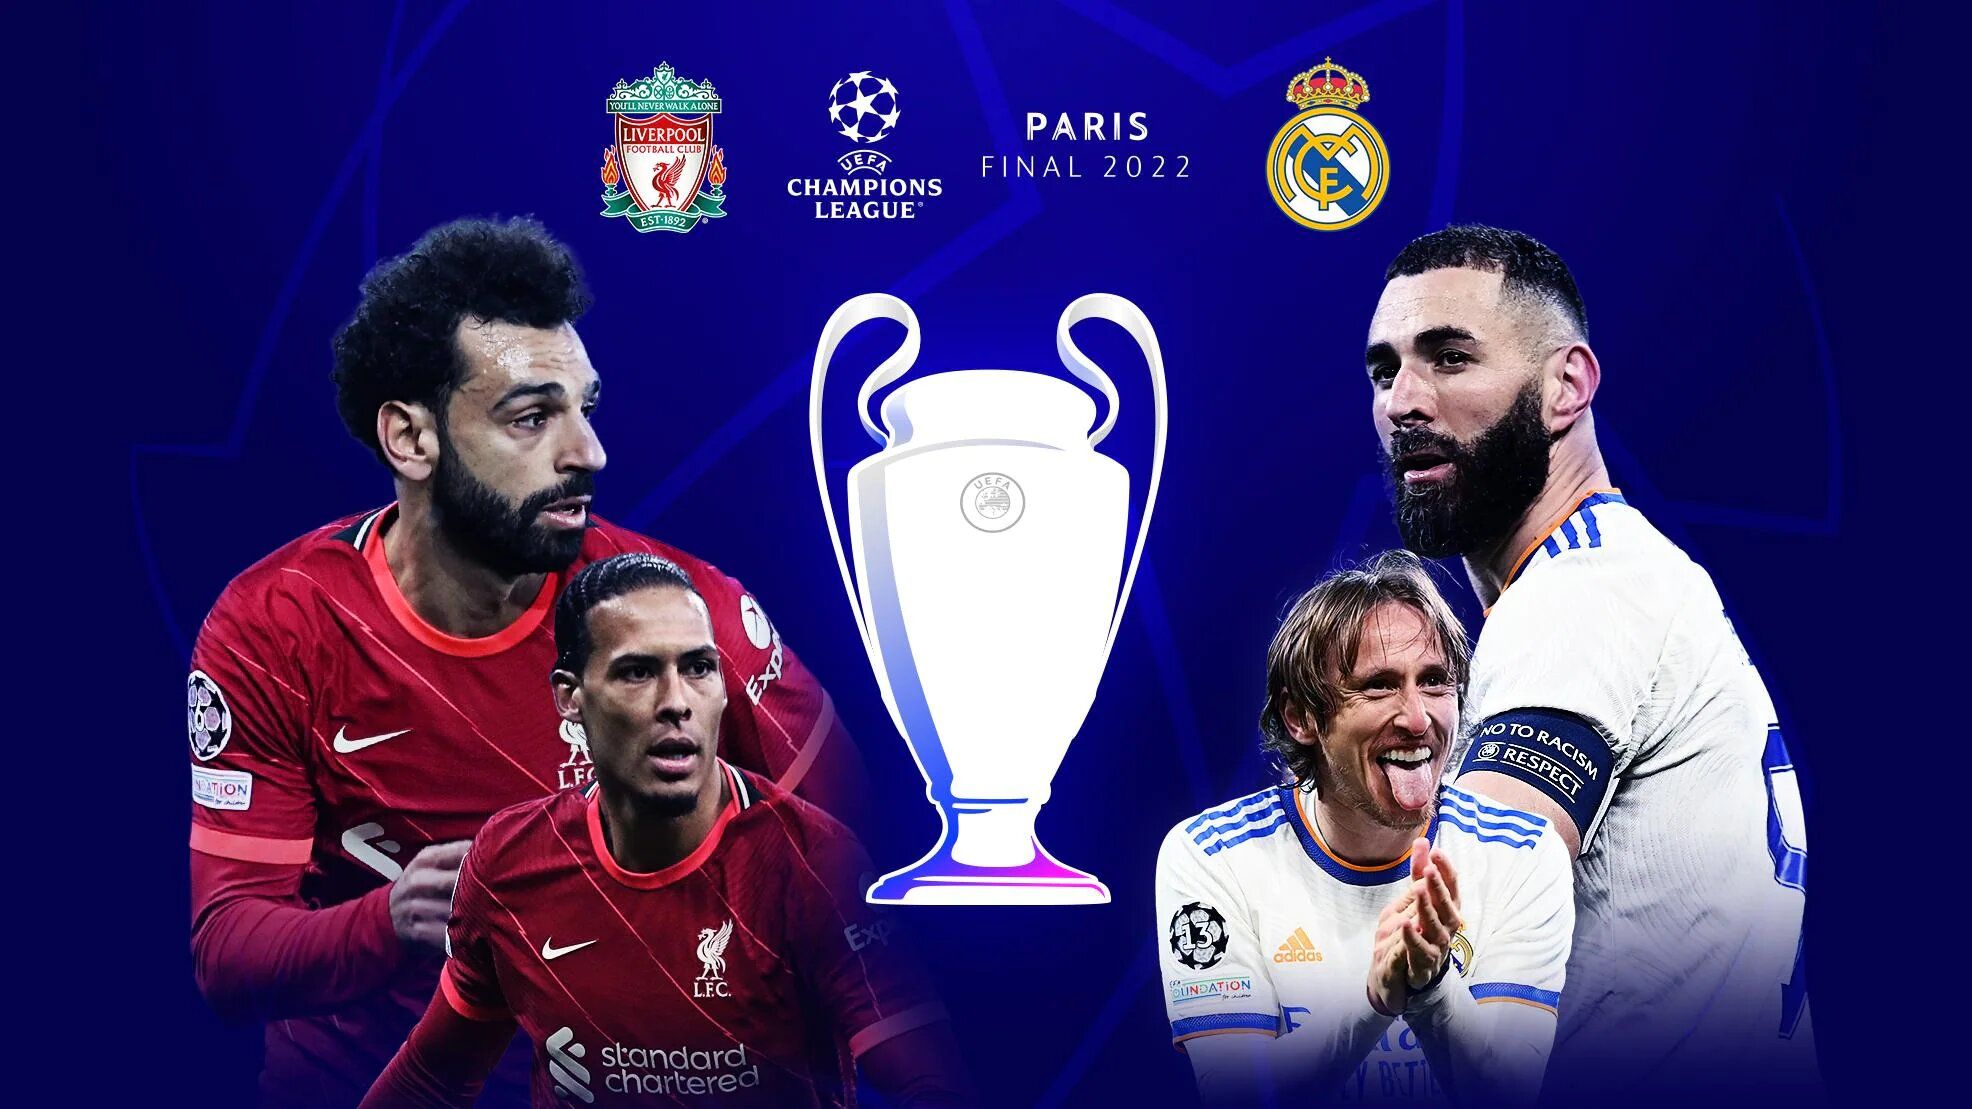 Champions League final 2022: where is it being played, time & date